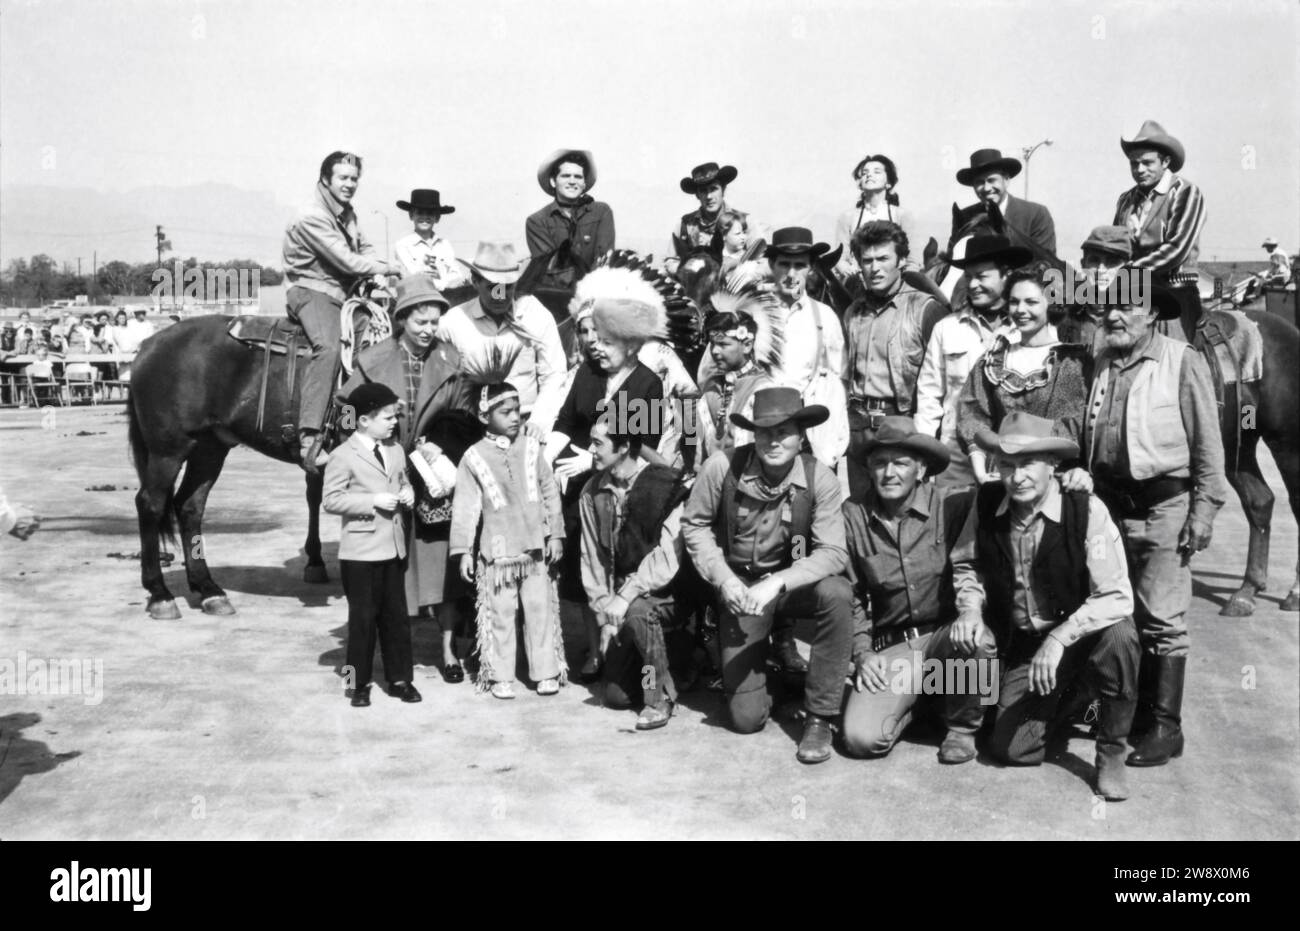 CLINT EASTWOOD in group photo circa 1963 candid at the time he was appearing in the TV series RAWHIDE at a cowboy / western show for disabled children with CLU GULAGER on horse at far left Stock Photo